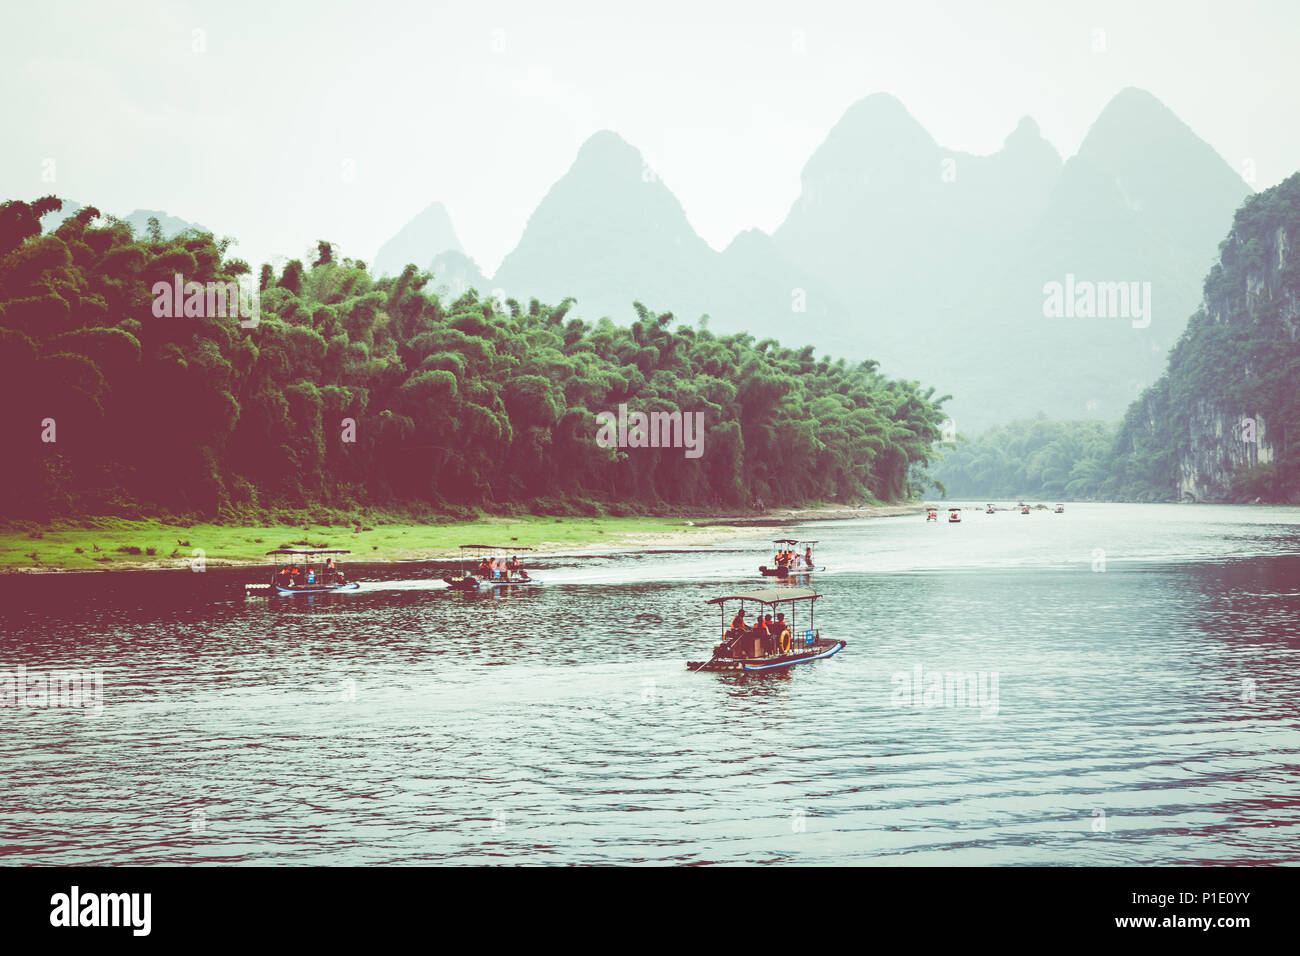 Scenic view of small tourist bamboo rafts sailing along the Li River among green woods and karst mountains at Yangshuo County of Guilin, China. Yangsh Stock Photo